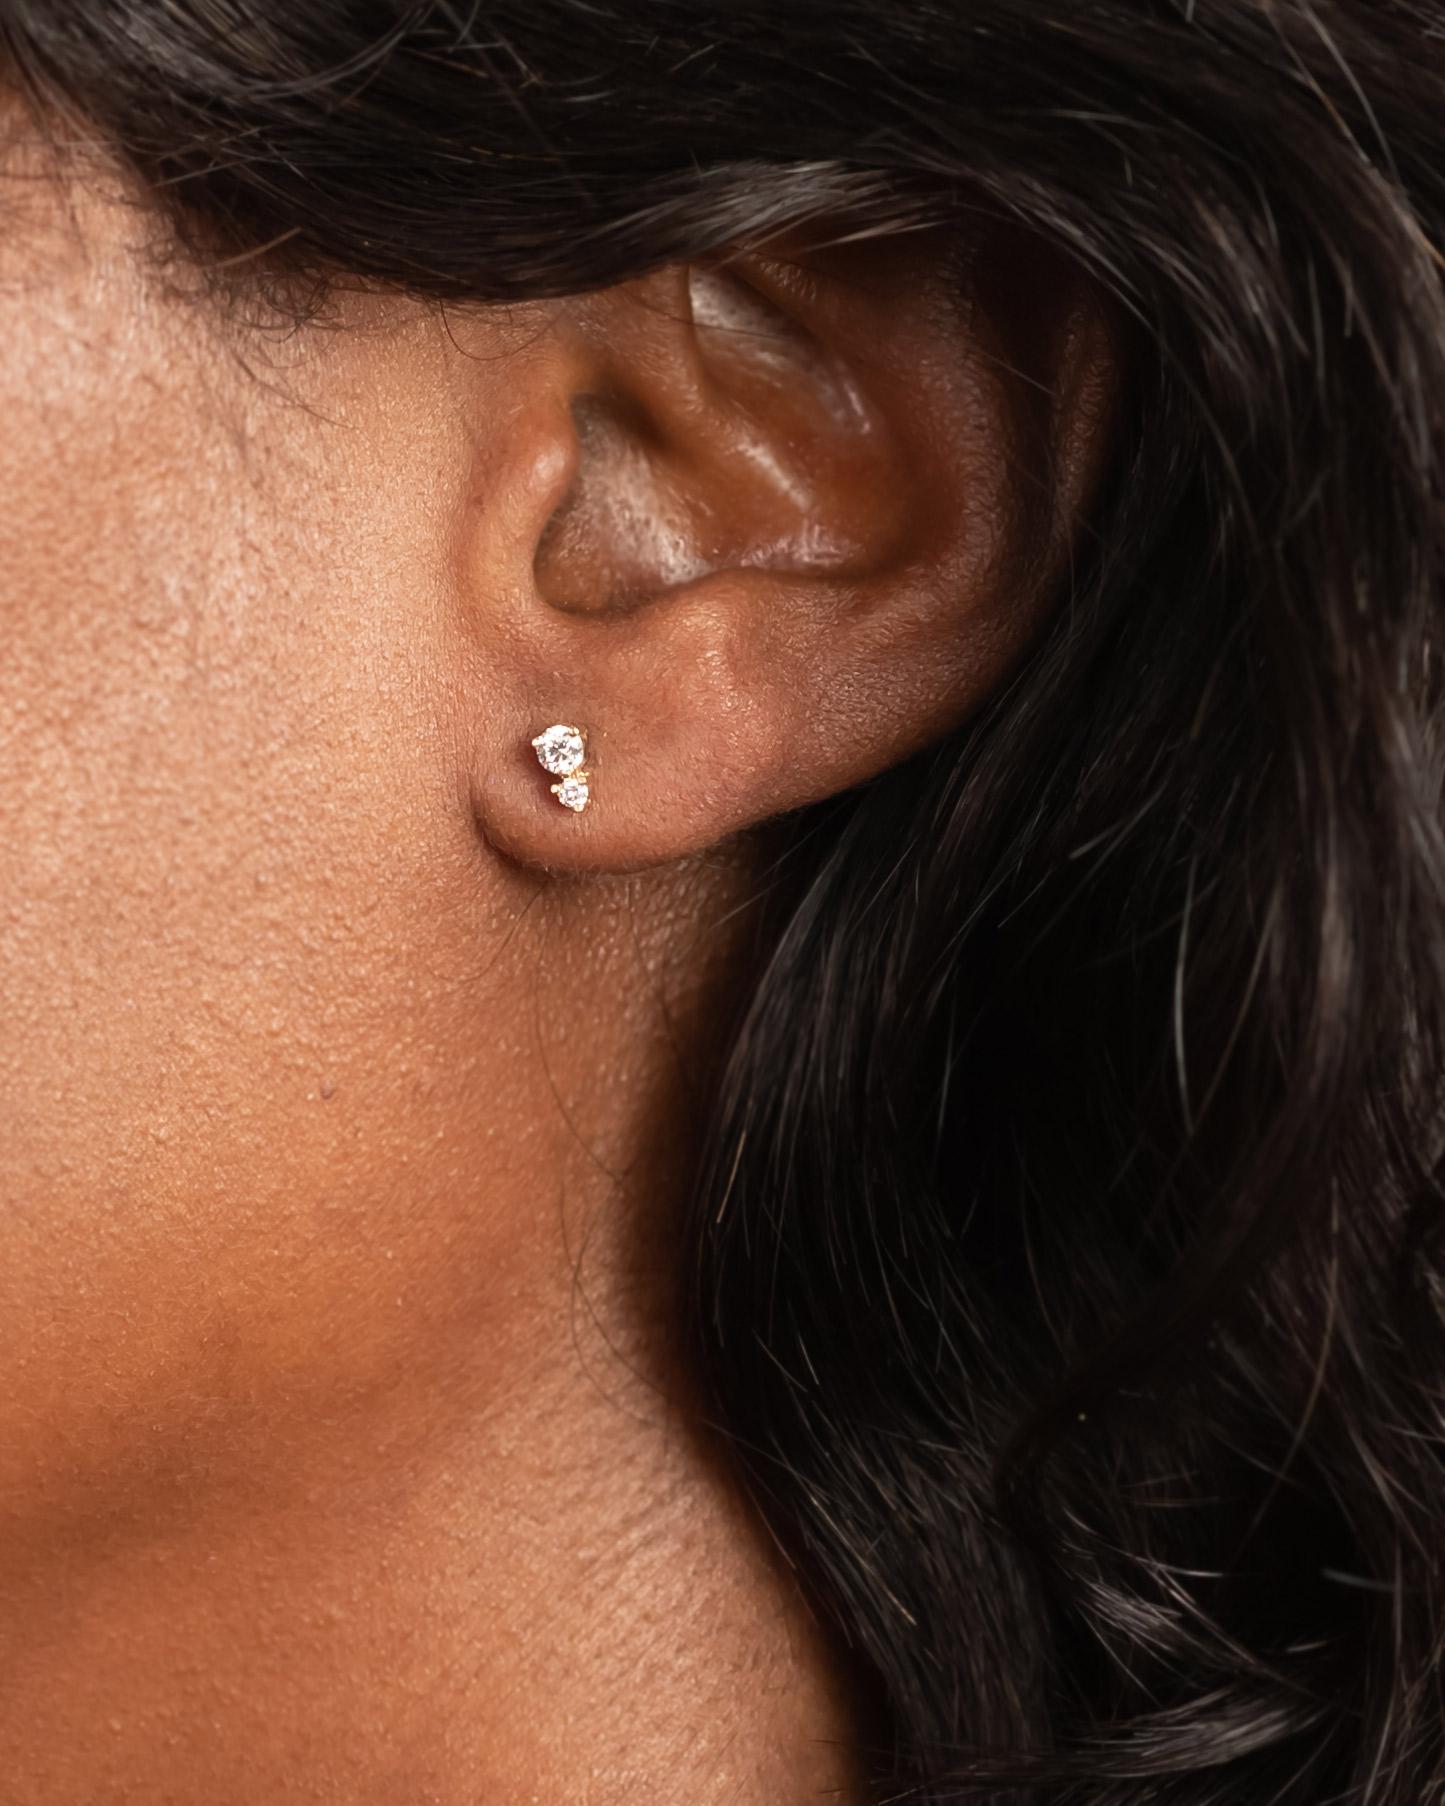 Timeless yet unique and incredibly sparkly, these diamond studs are the perfect addition to your ear game. Constructed in 14k Yellow Gold with double-notched posts for extra security and matching post backs.  

Each item is designed and made to